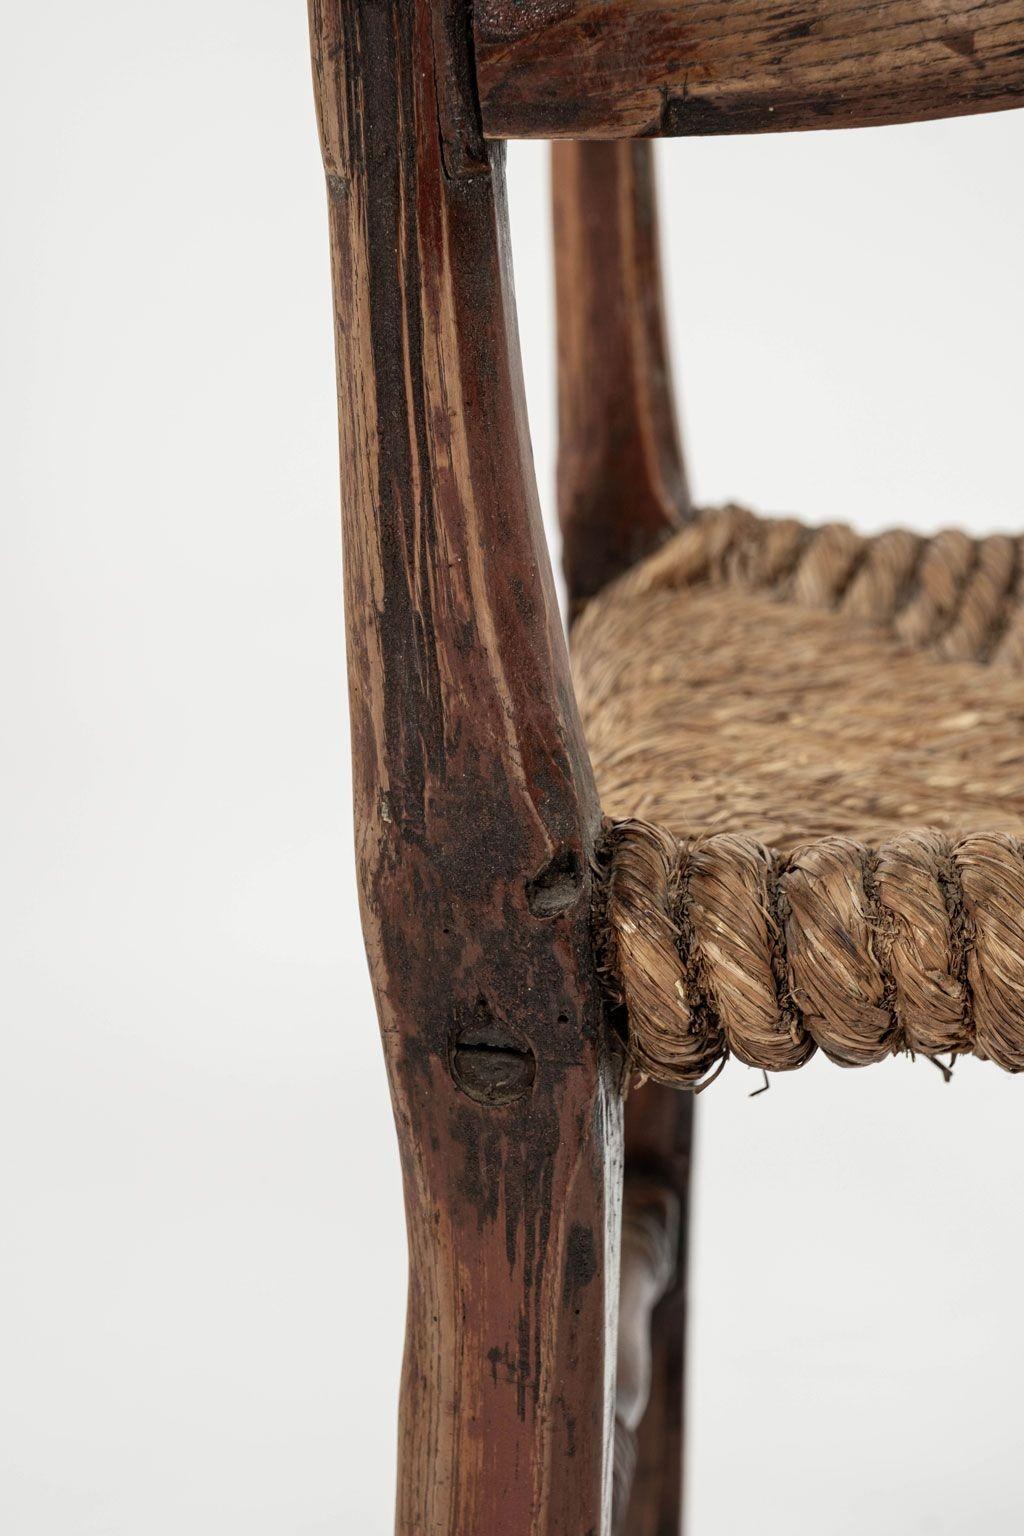 Baroque Swedish armchair hand-carved from beechwood and ash (circa 1670-1699), with traces of early ruddy-color paint. Well-worn prominent, almost-serpentine shaped, claw arms, original rope seat and turned upright supports connected by original